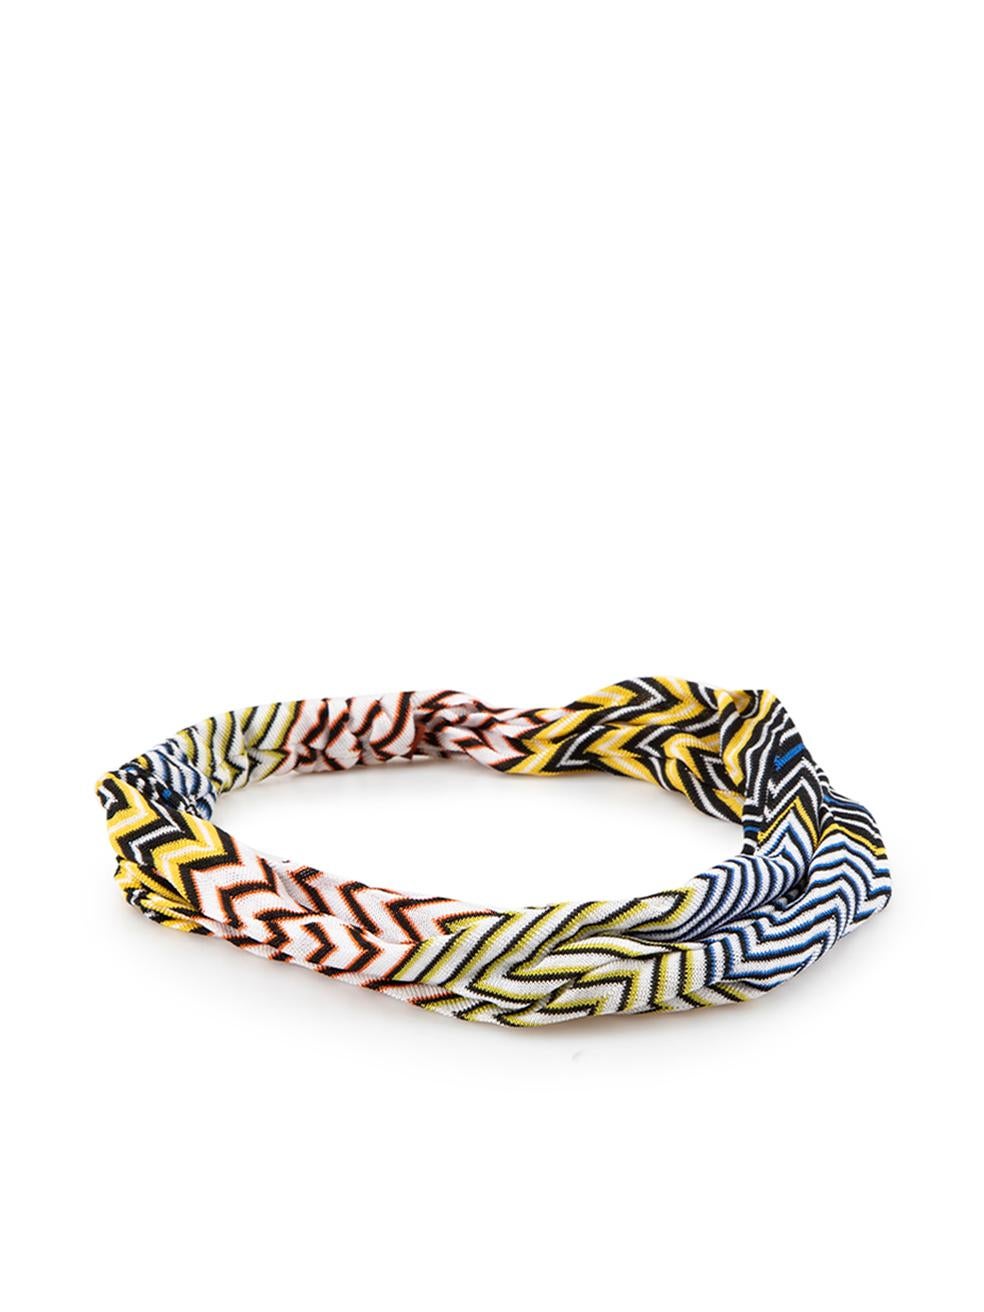 CONDITION is Very good. Hardly any visible wear to headband is evident on this used Missoni designer resale item.



Details


Multicolour

Synthetic

Headband

Zigzag pattern

Elasticated



 



 

Composition

NO COMPOSITION LABEL BUT FEELS LIKE